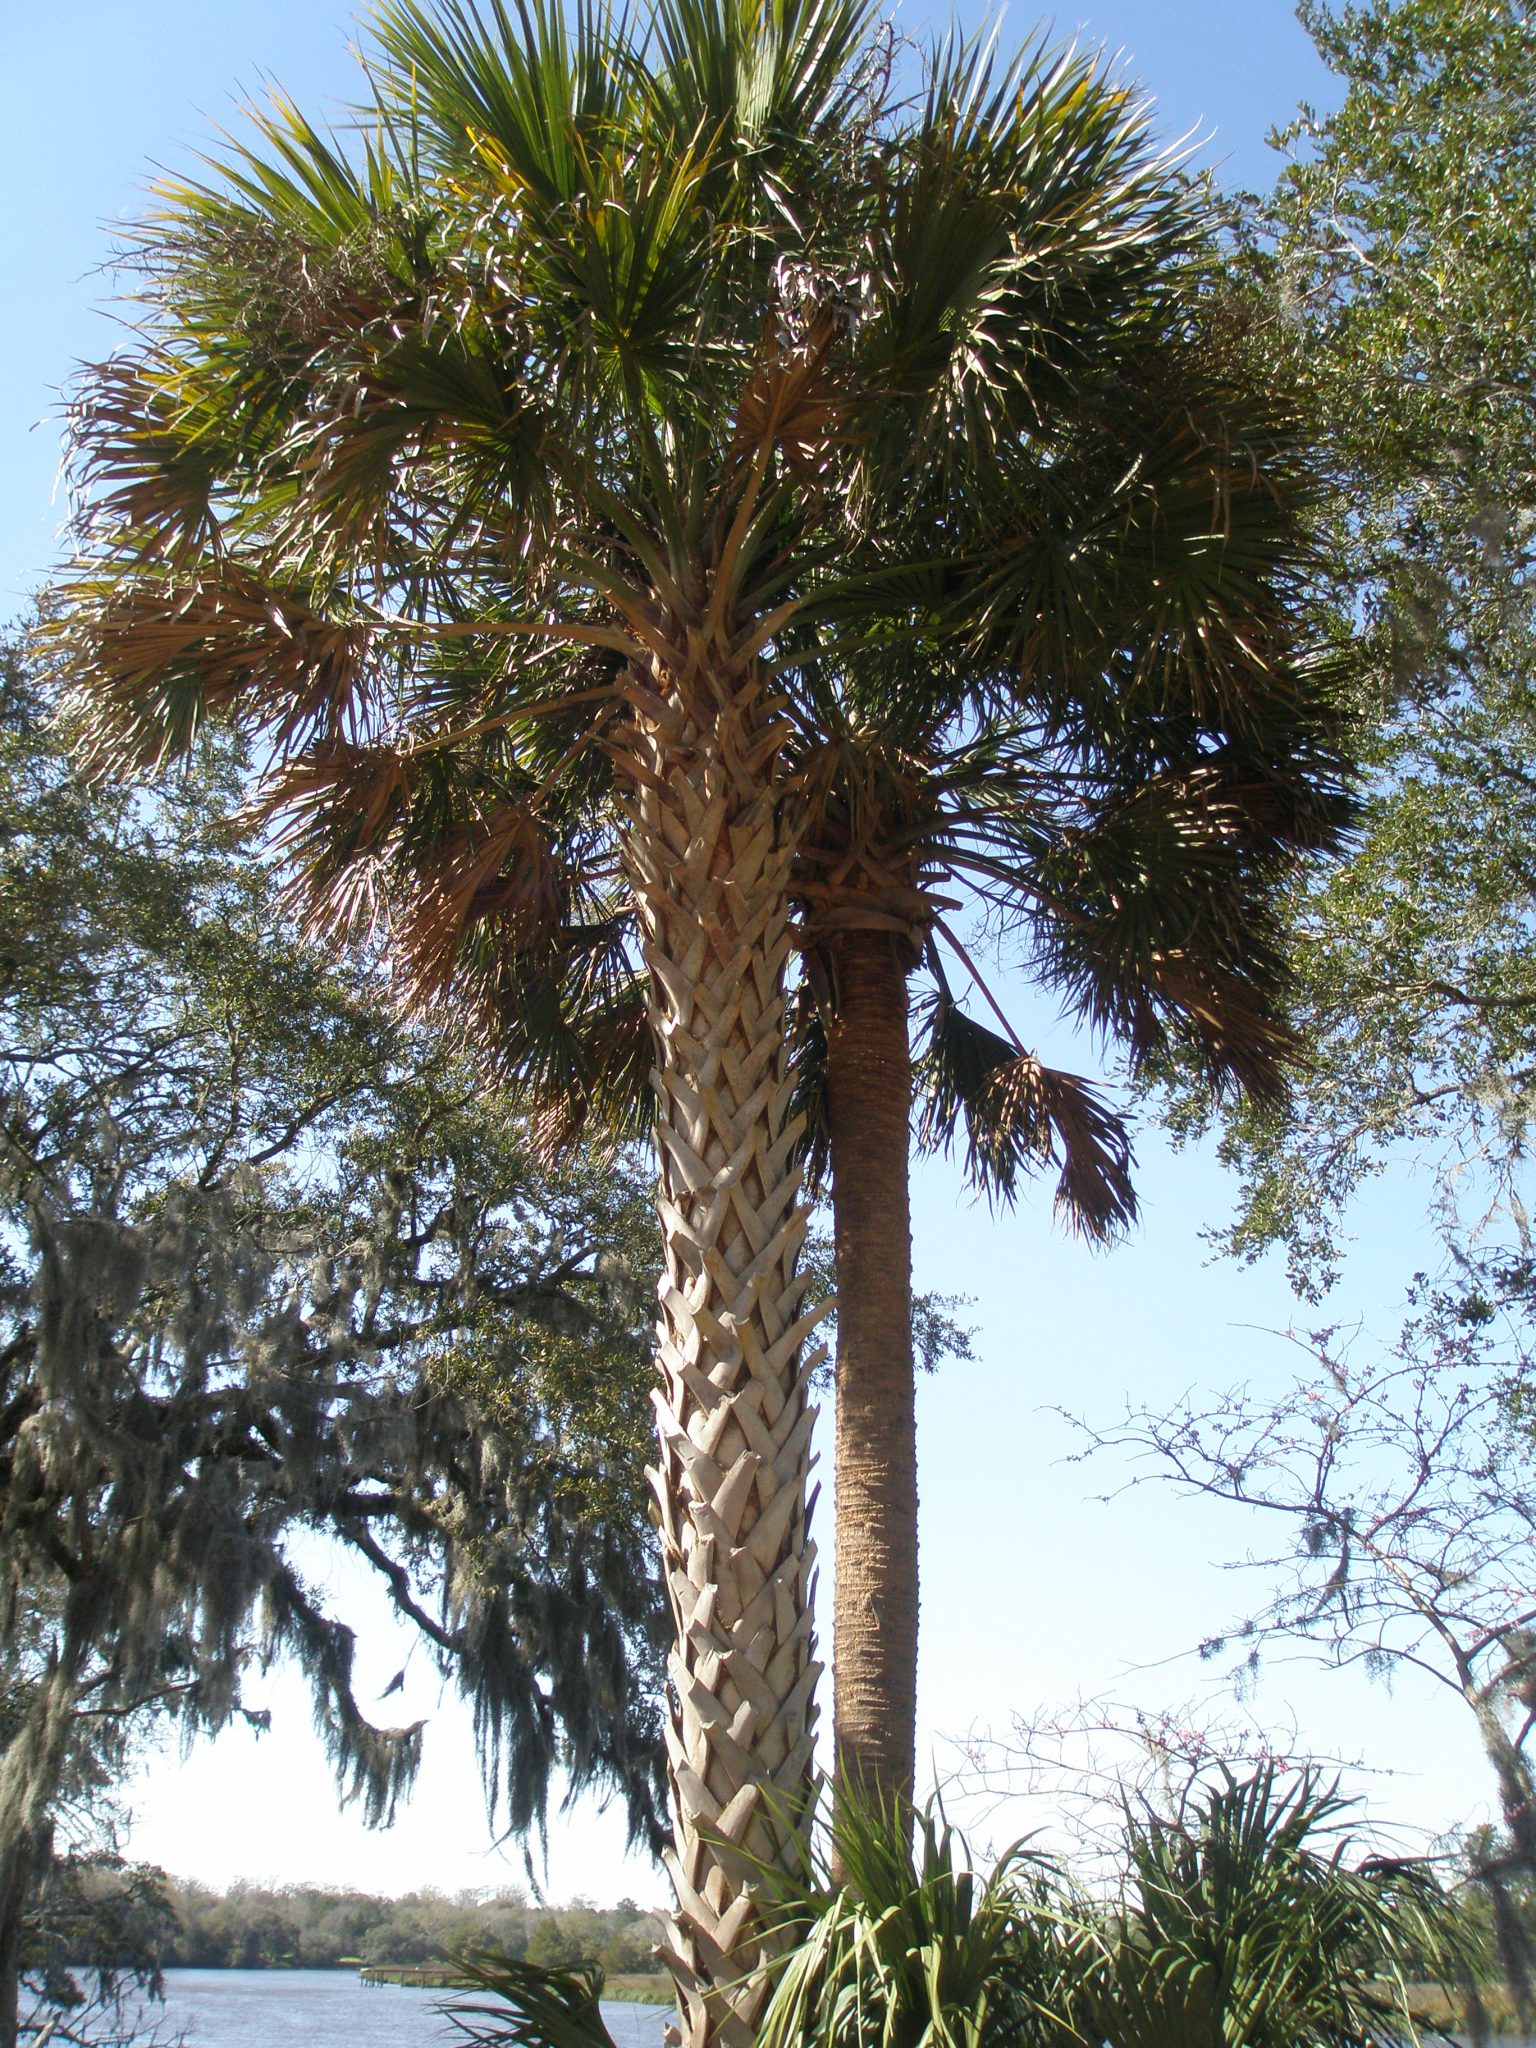 More Palmettos...standing firm against the wind.